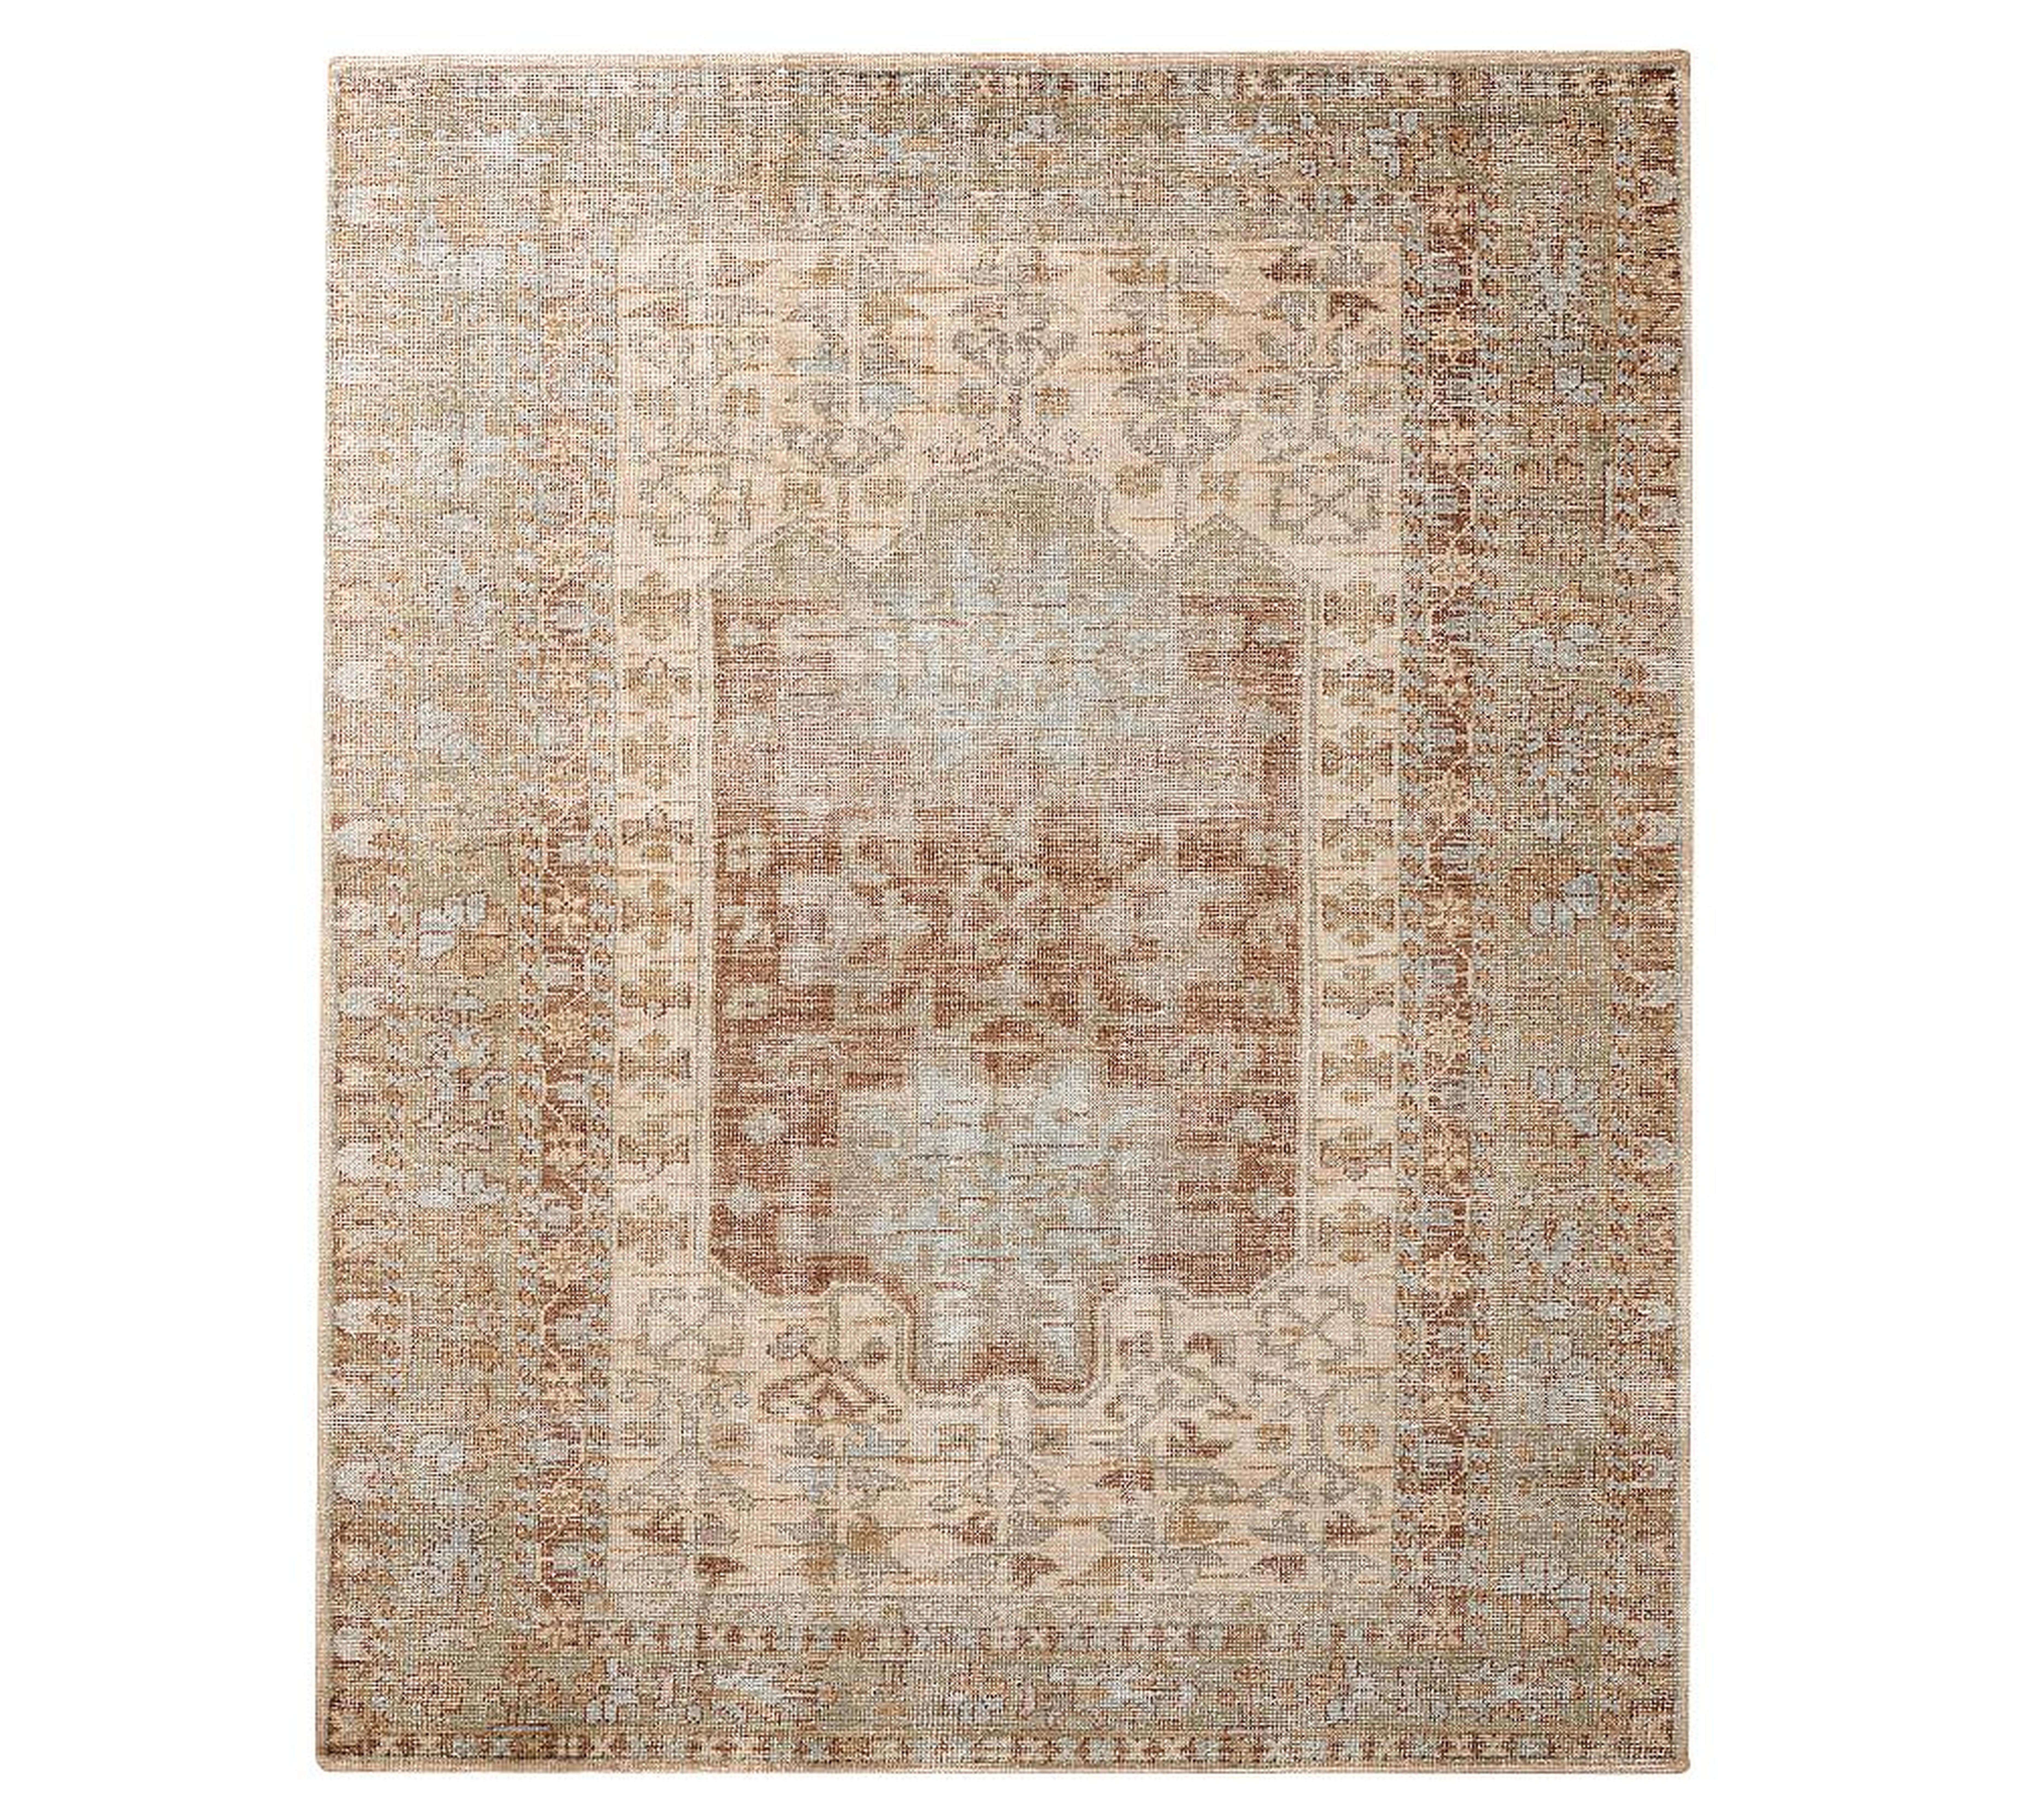 Arlet Hand-Knotted Wool Rug, 8 x 10', Multi - Pottery Barn